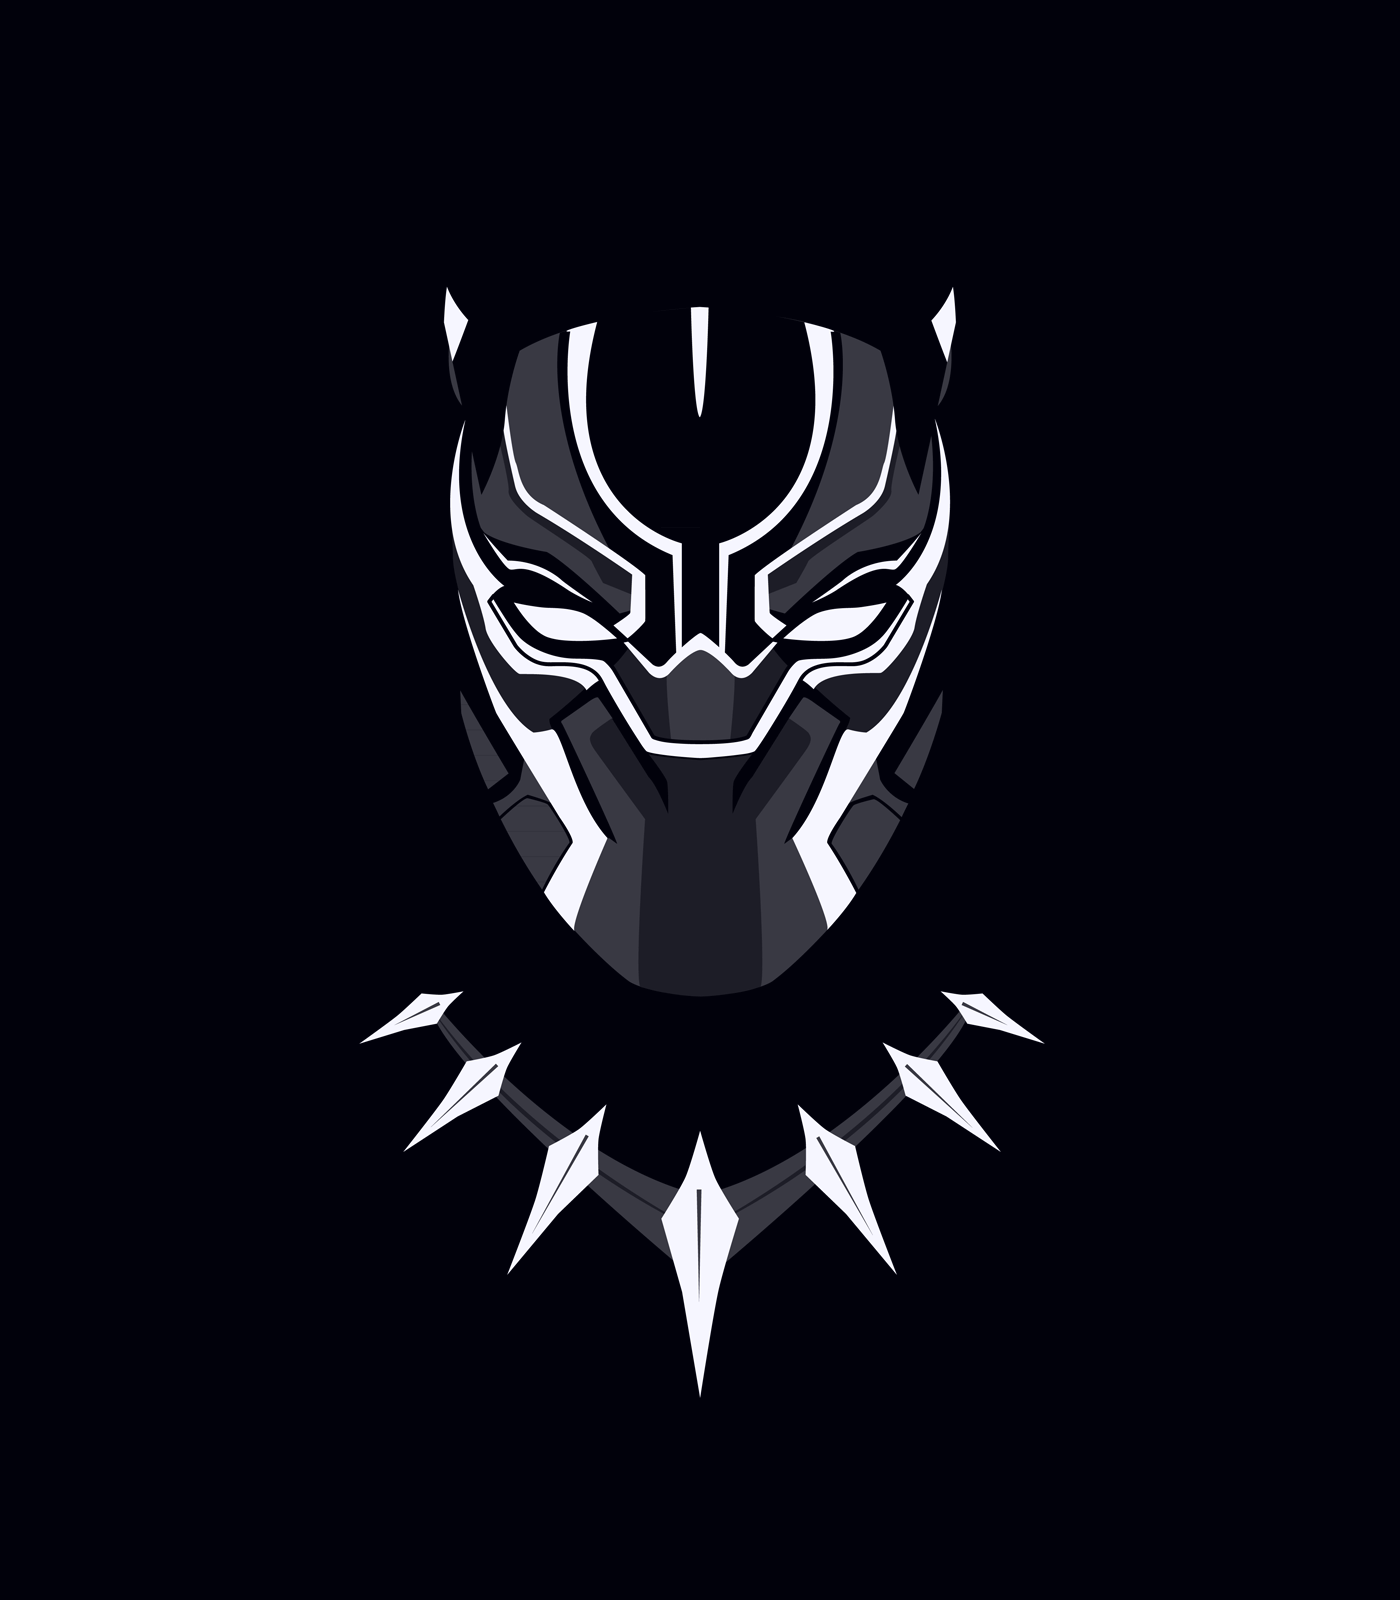 Black Panther Marvel Wallpaper 4k iPhone, Android and Desktop